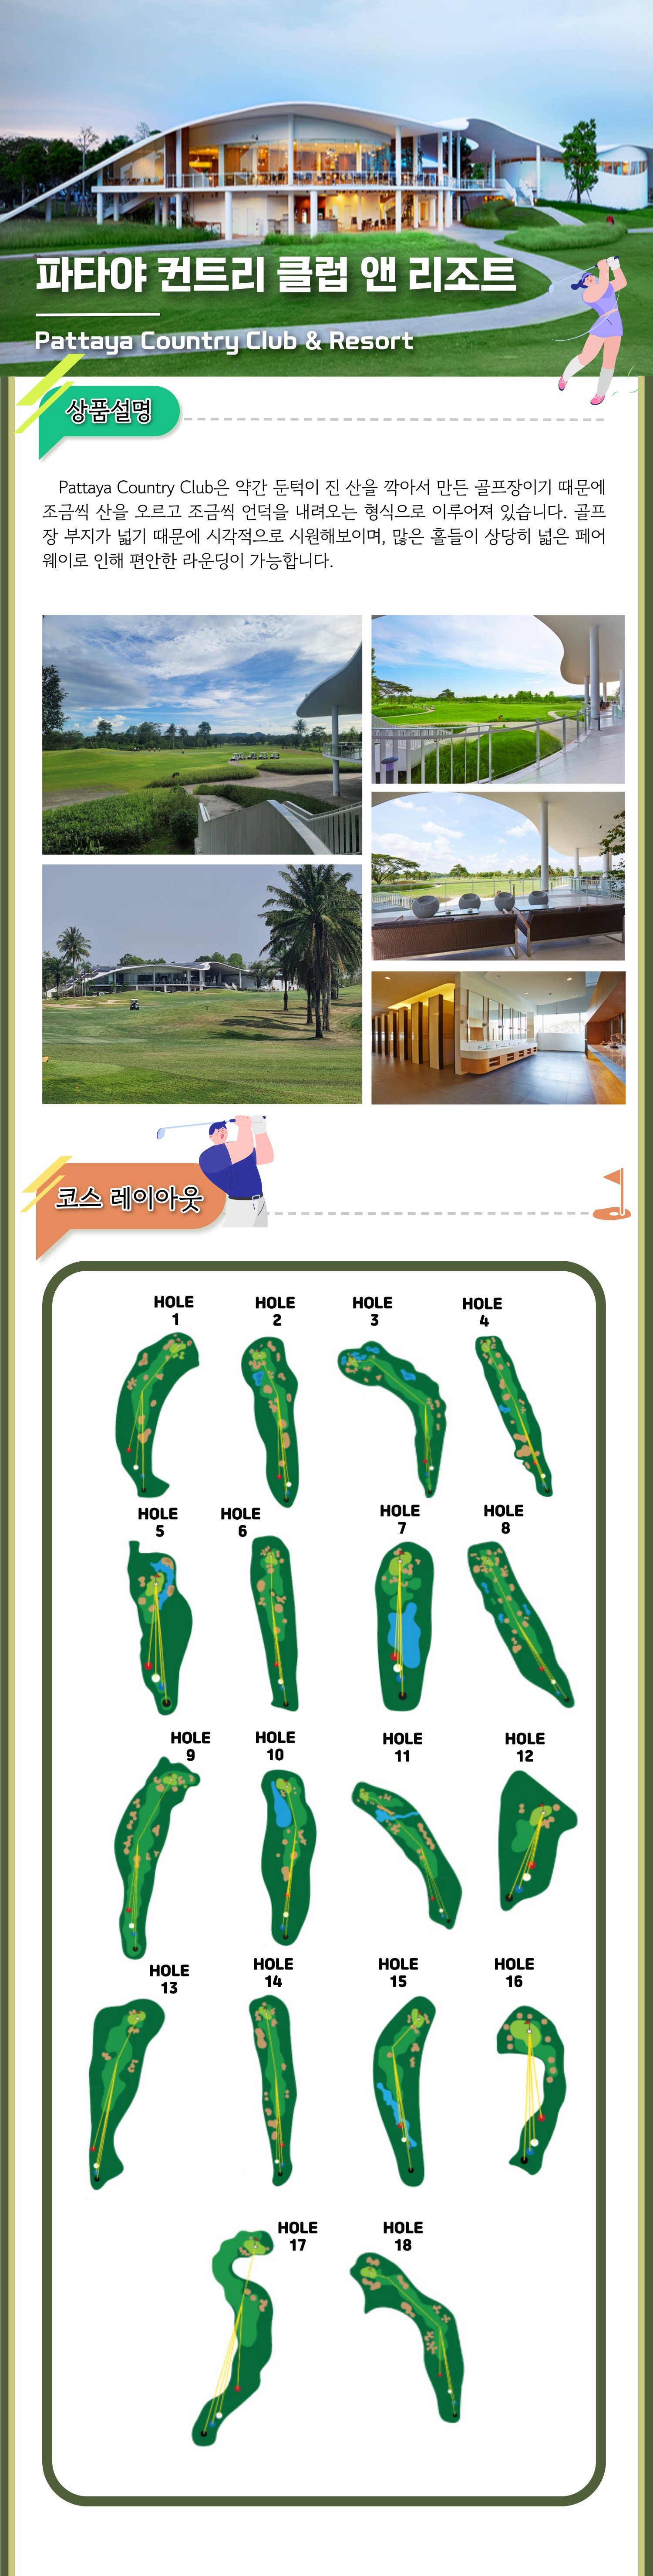 https://img5.pic.in.th/file/secure-sv1/KTT-GOLF-020.jpeg